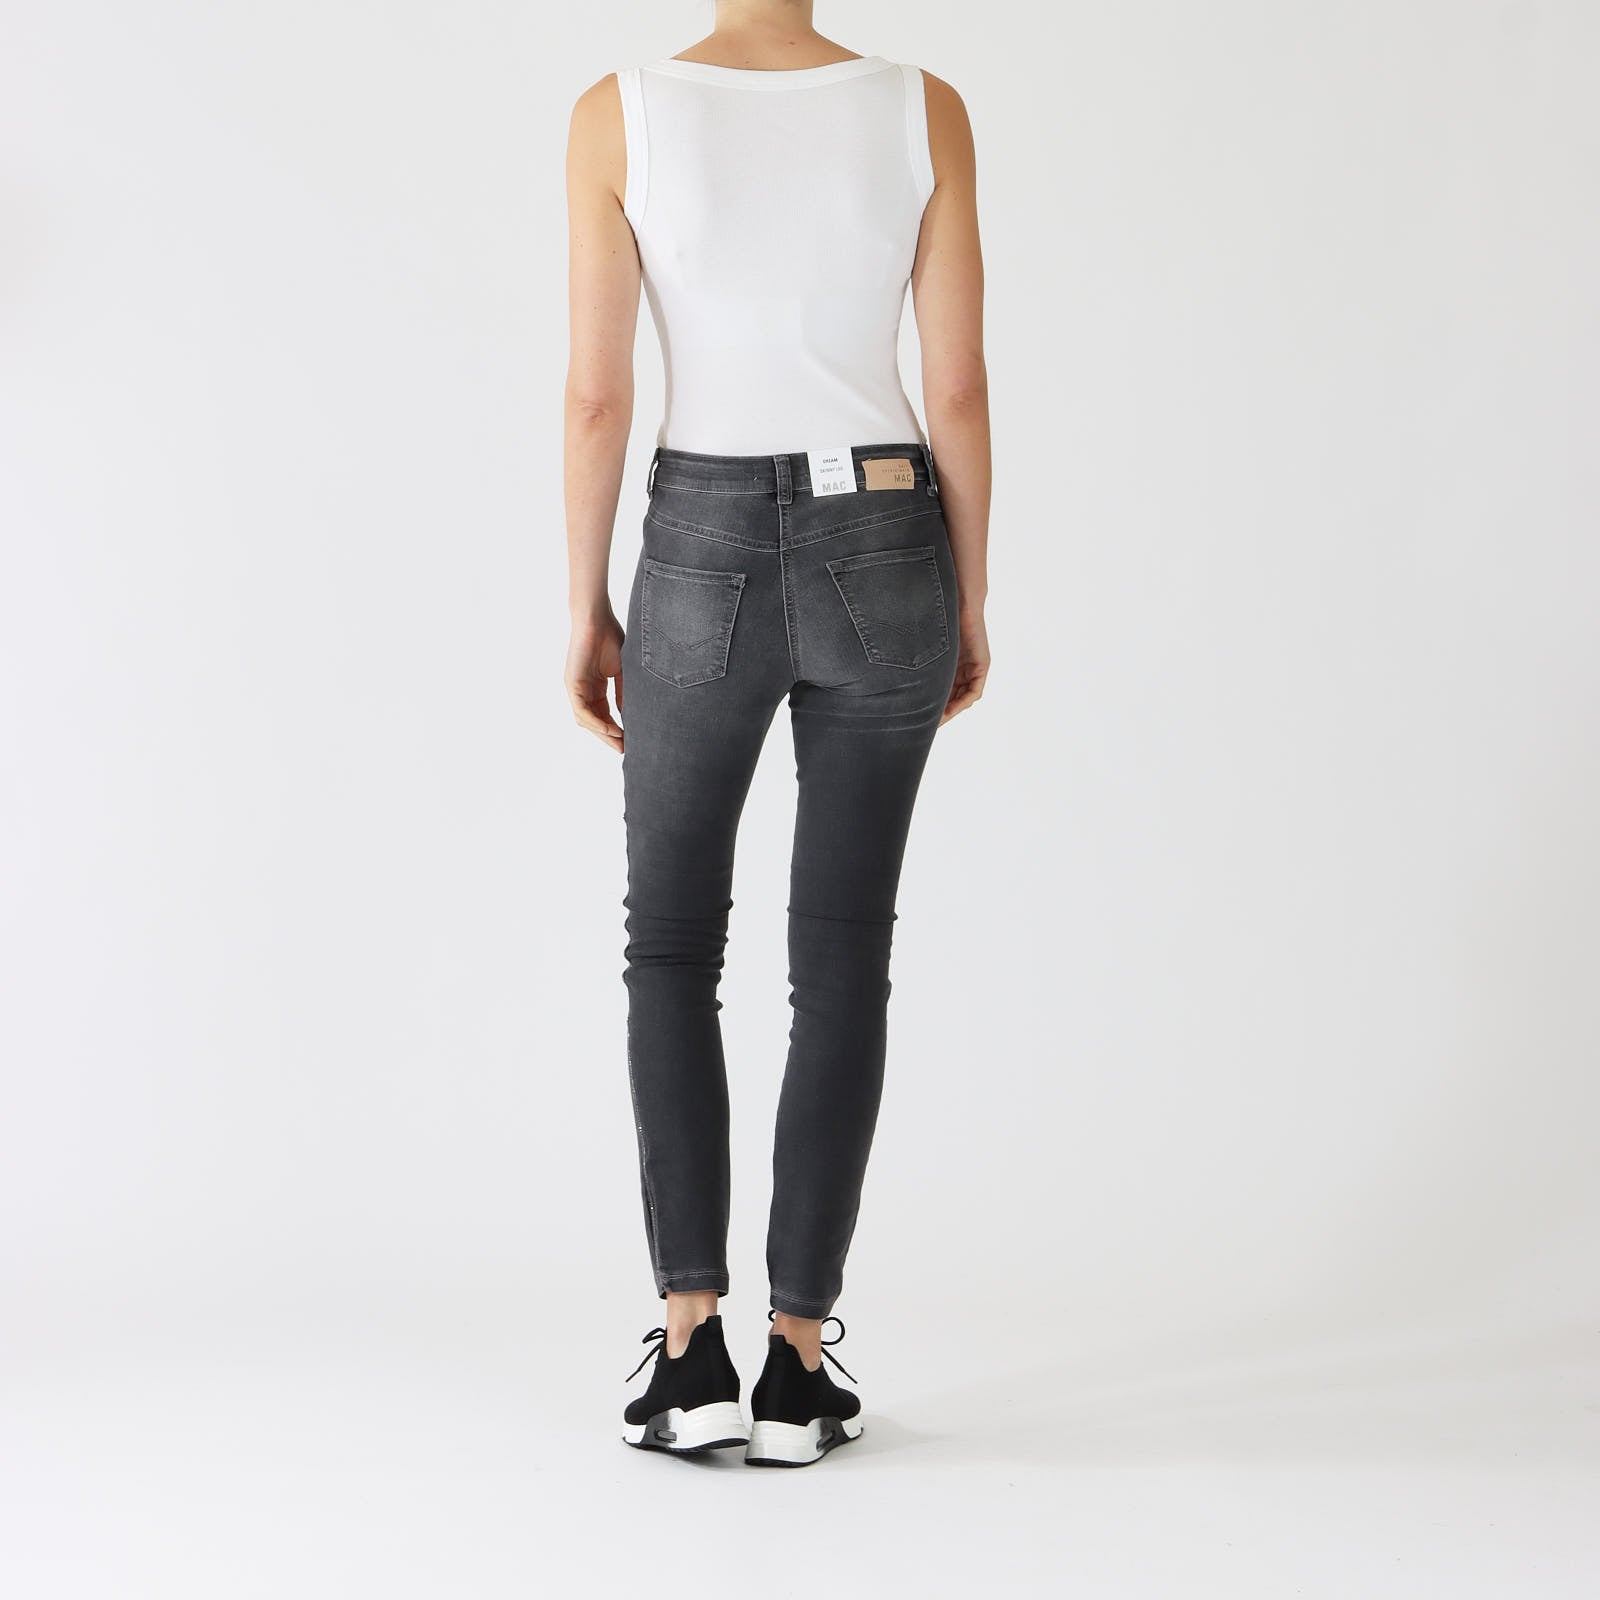 Light Anthracite Dream Skinny Chain Jeans